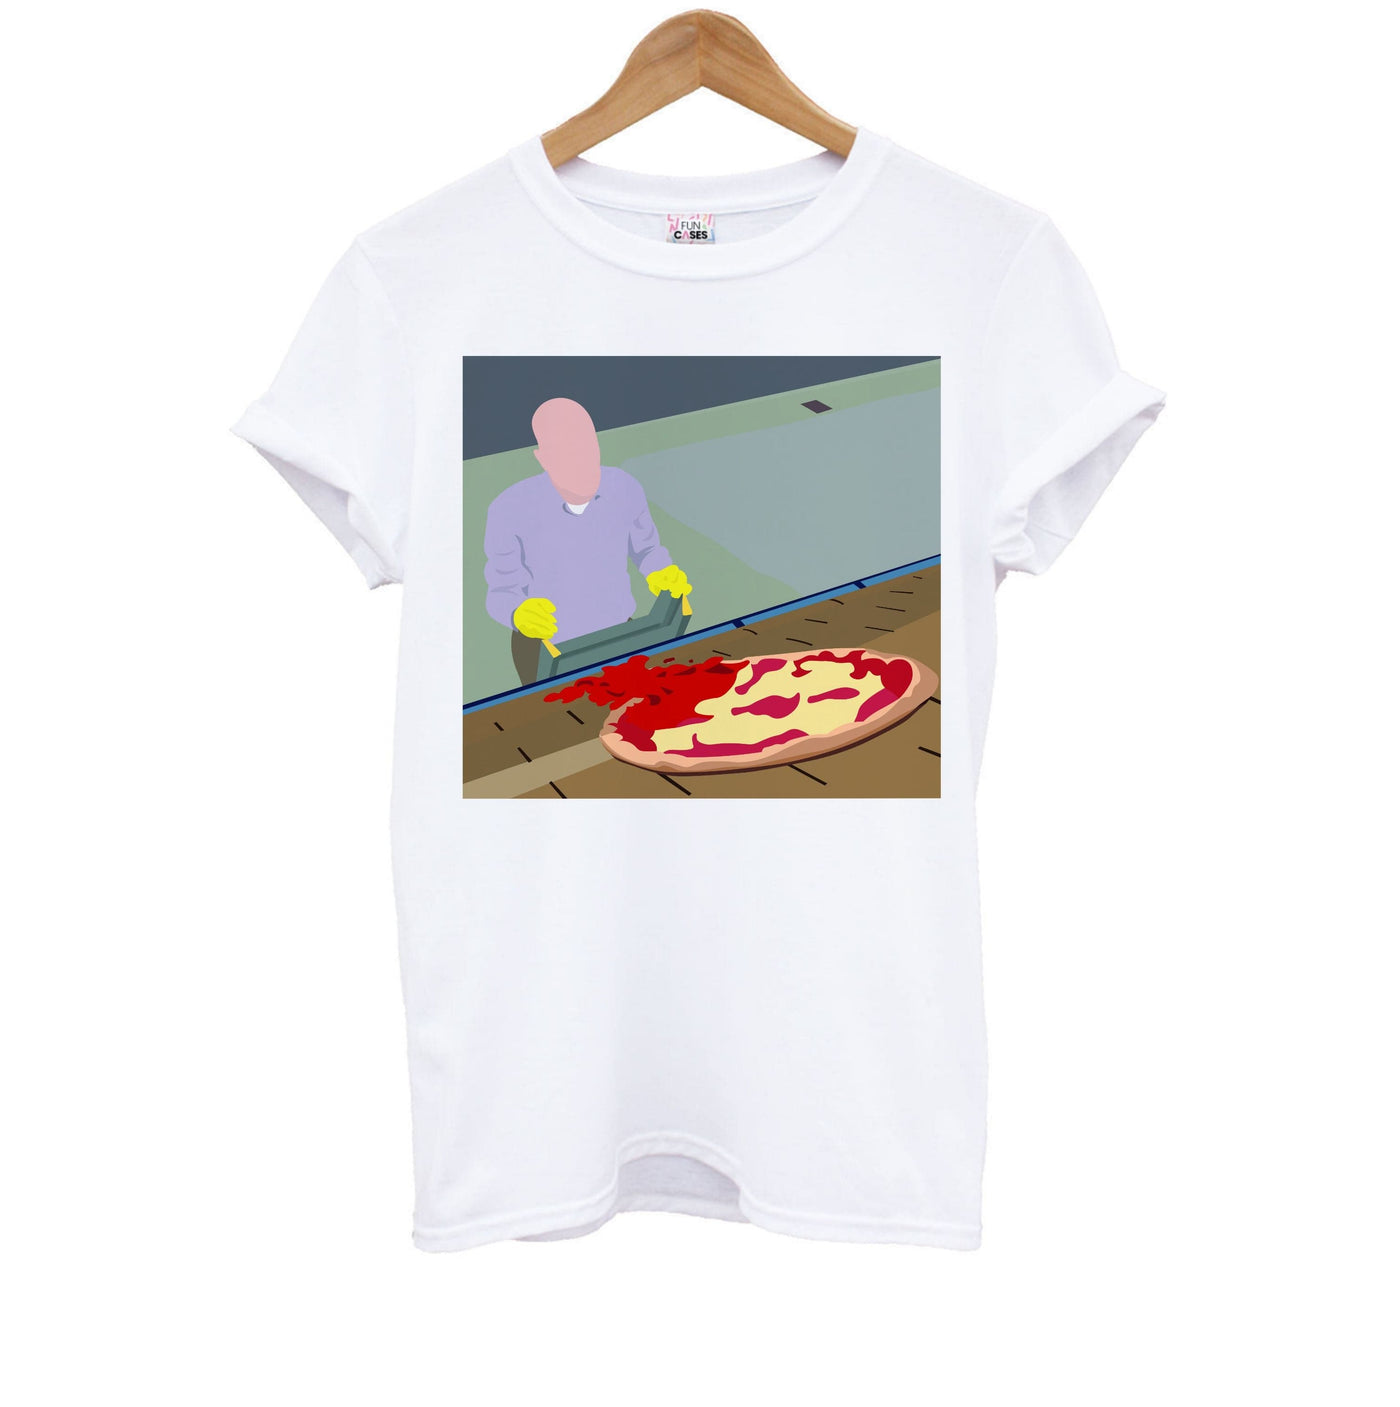 Pizza On The Roof - Breaking Bad Kids T-Shirt